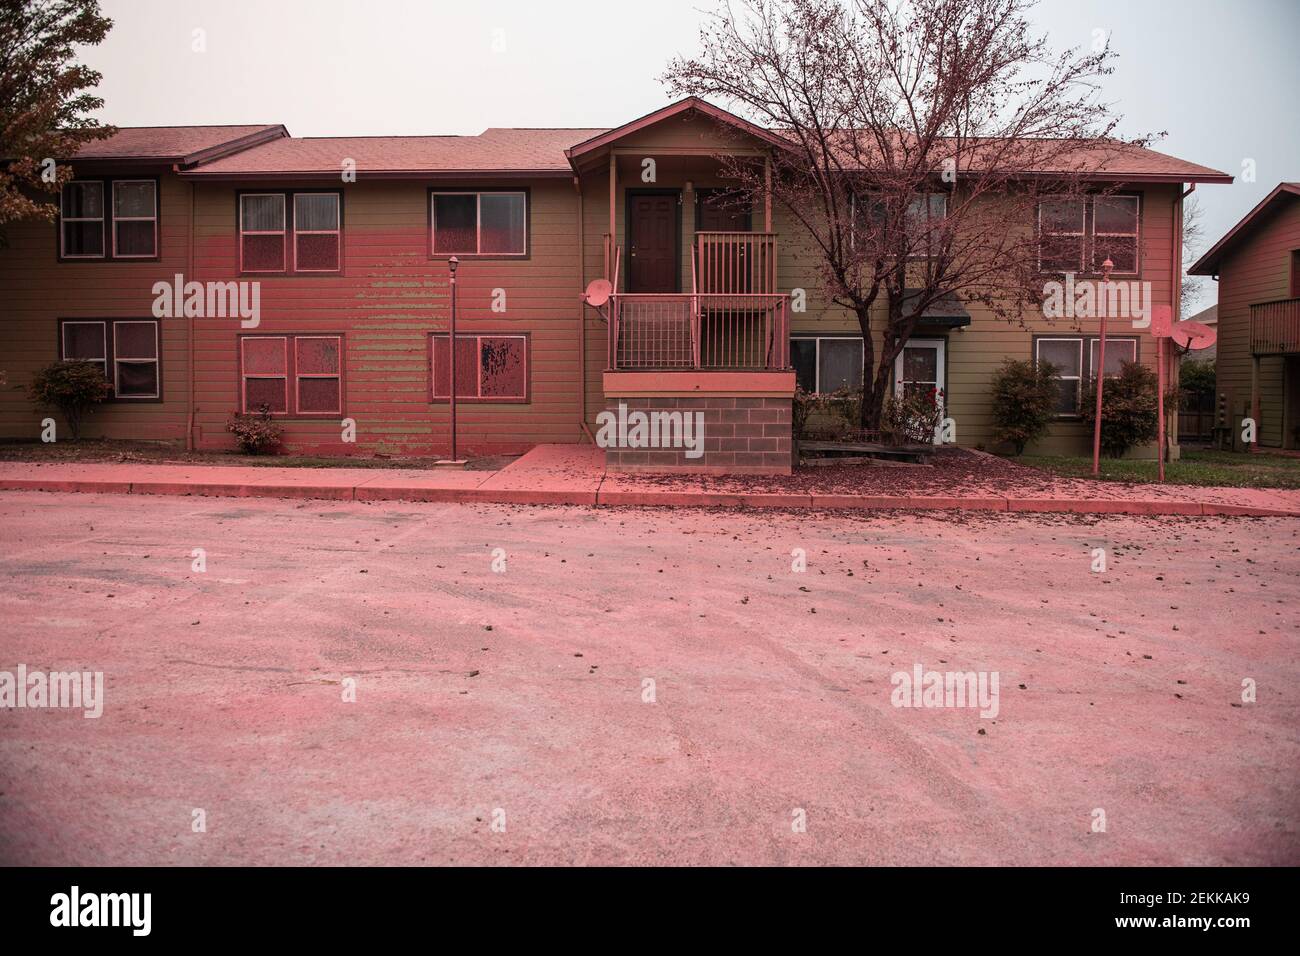 TALENT, ORE - SEPTEMBER 18, 2020: A general view of the Anderson Vista Apartments which were sprayed with fire retardent during the Almeda Fire. The town of Talent, Oregon, showing the burned out homes, cars and rubble left behind. In Talent, about 20 miles north of the California border, homes were charred beyond recognition. Across the western US, at least 87 wildfires are burning, according to the National Interagency Fire Center. They've torched more than 4.7 million acres -- more than six times the area of Rhode Island. Credit: Chris Tuite/imageSPACE/Sipa USA Stock Photo